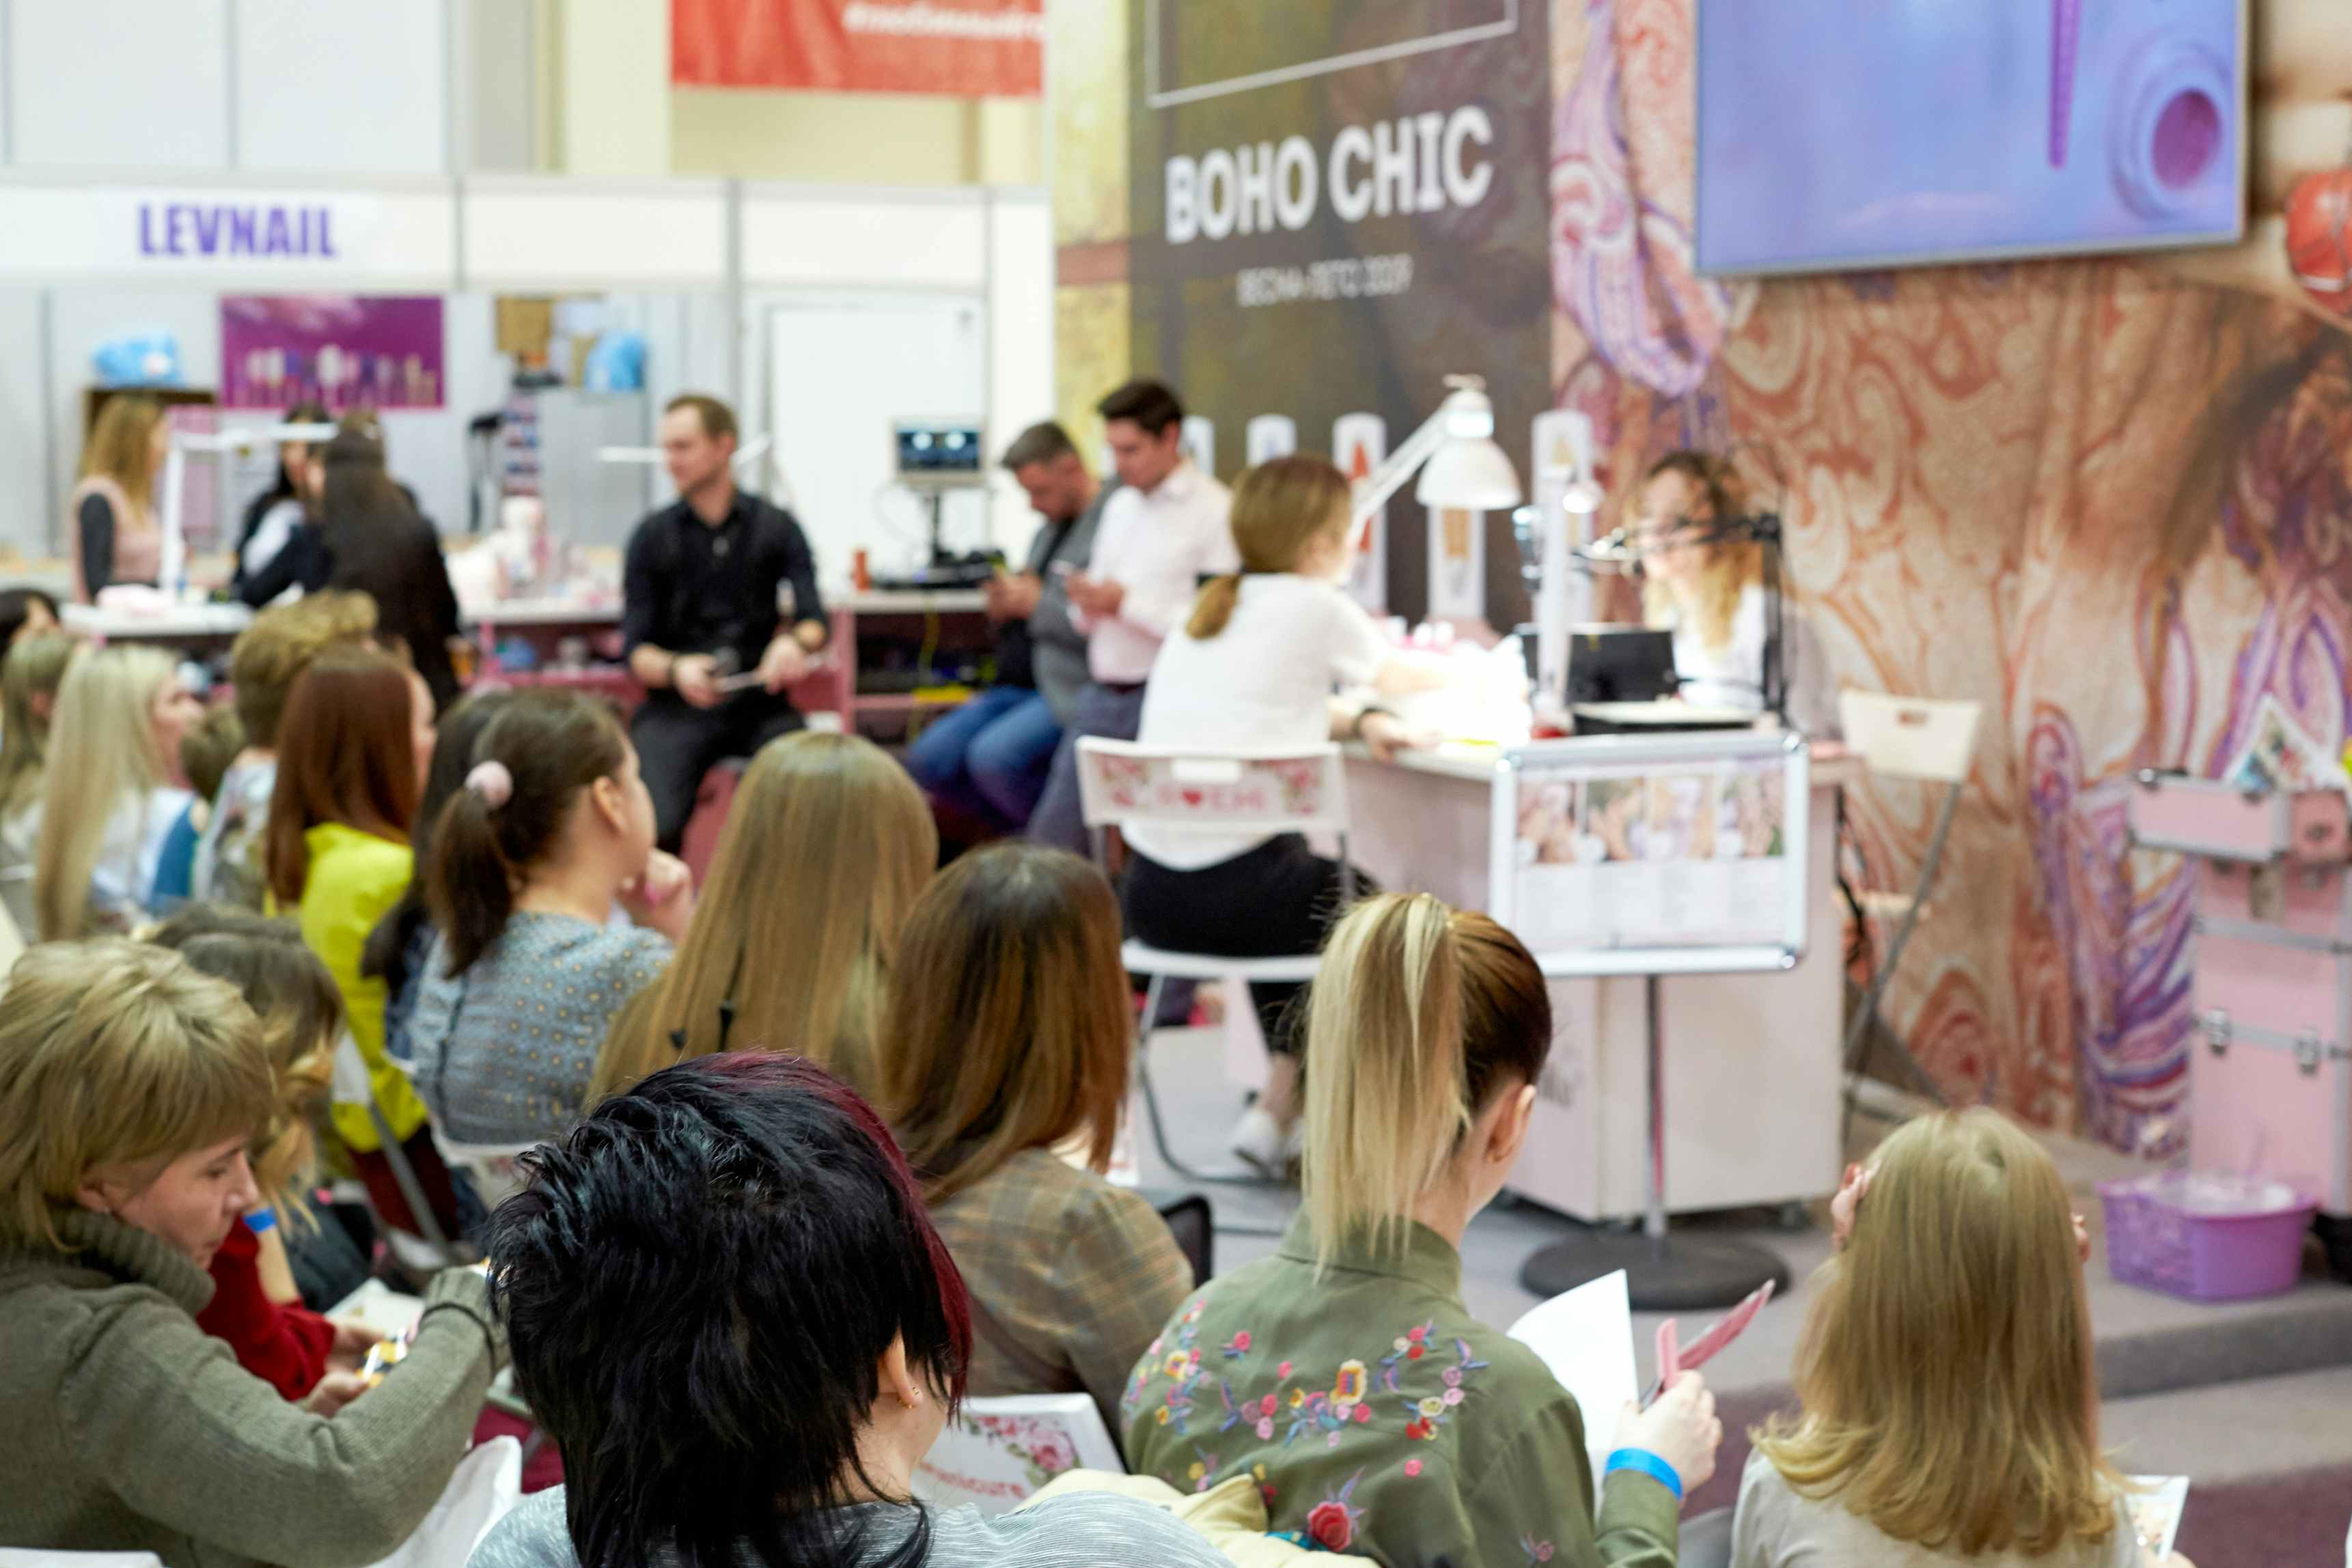 People at a Beauty Expo watching someone do a manicure at a booth